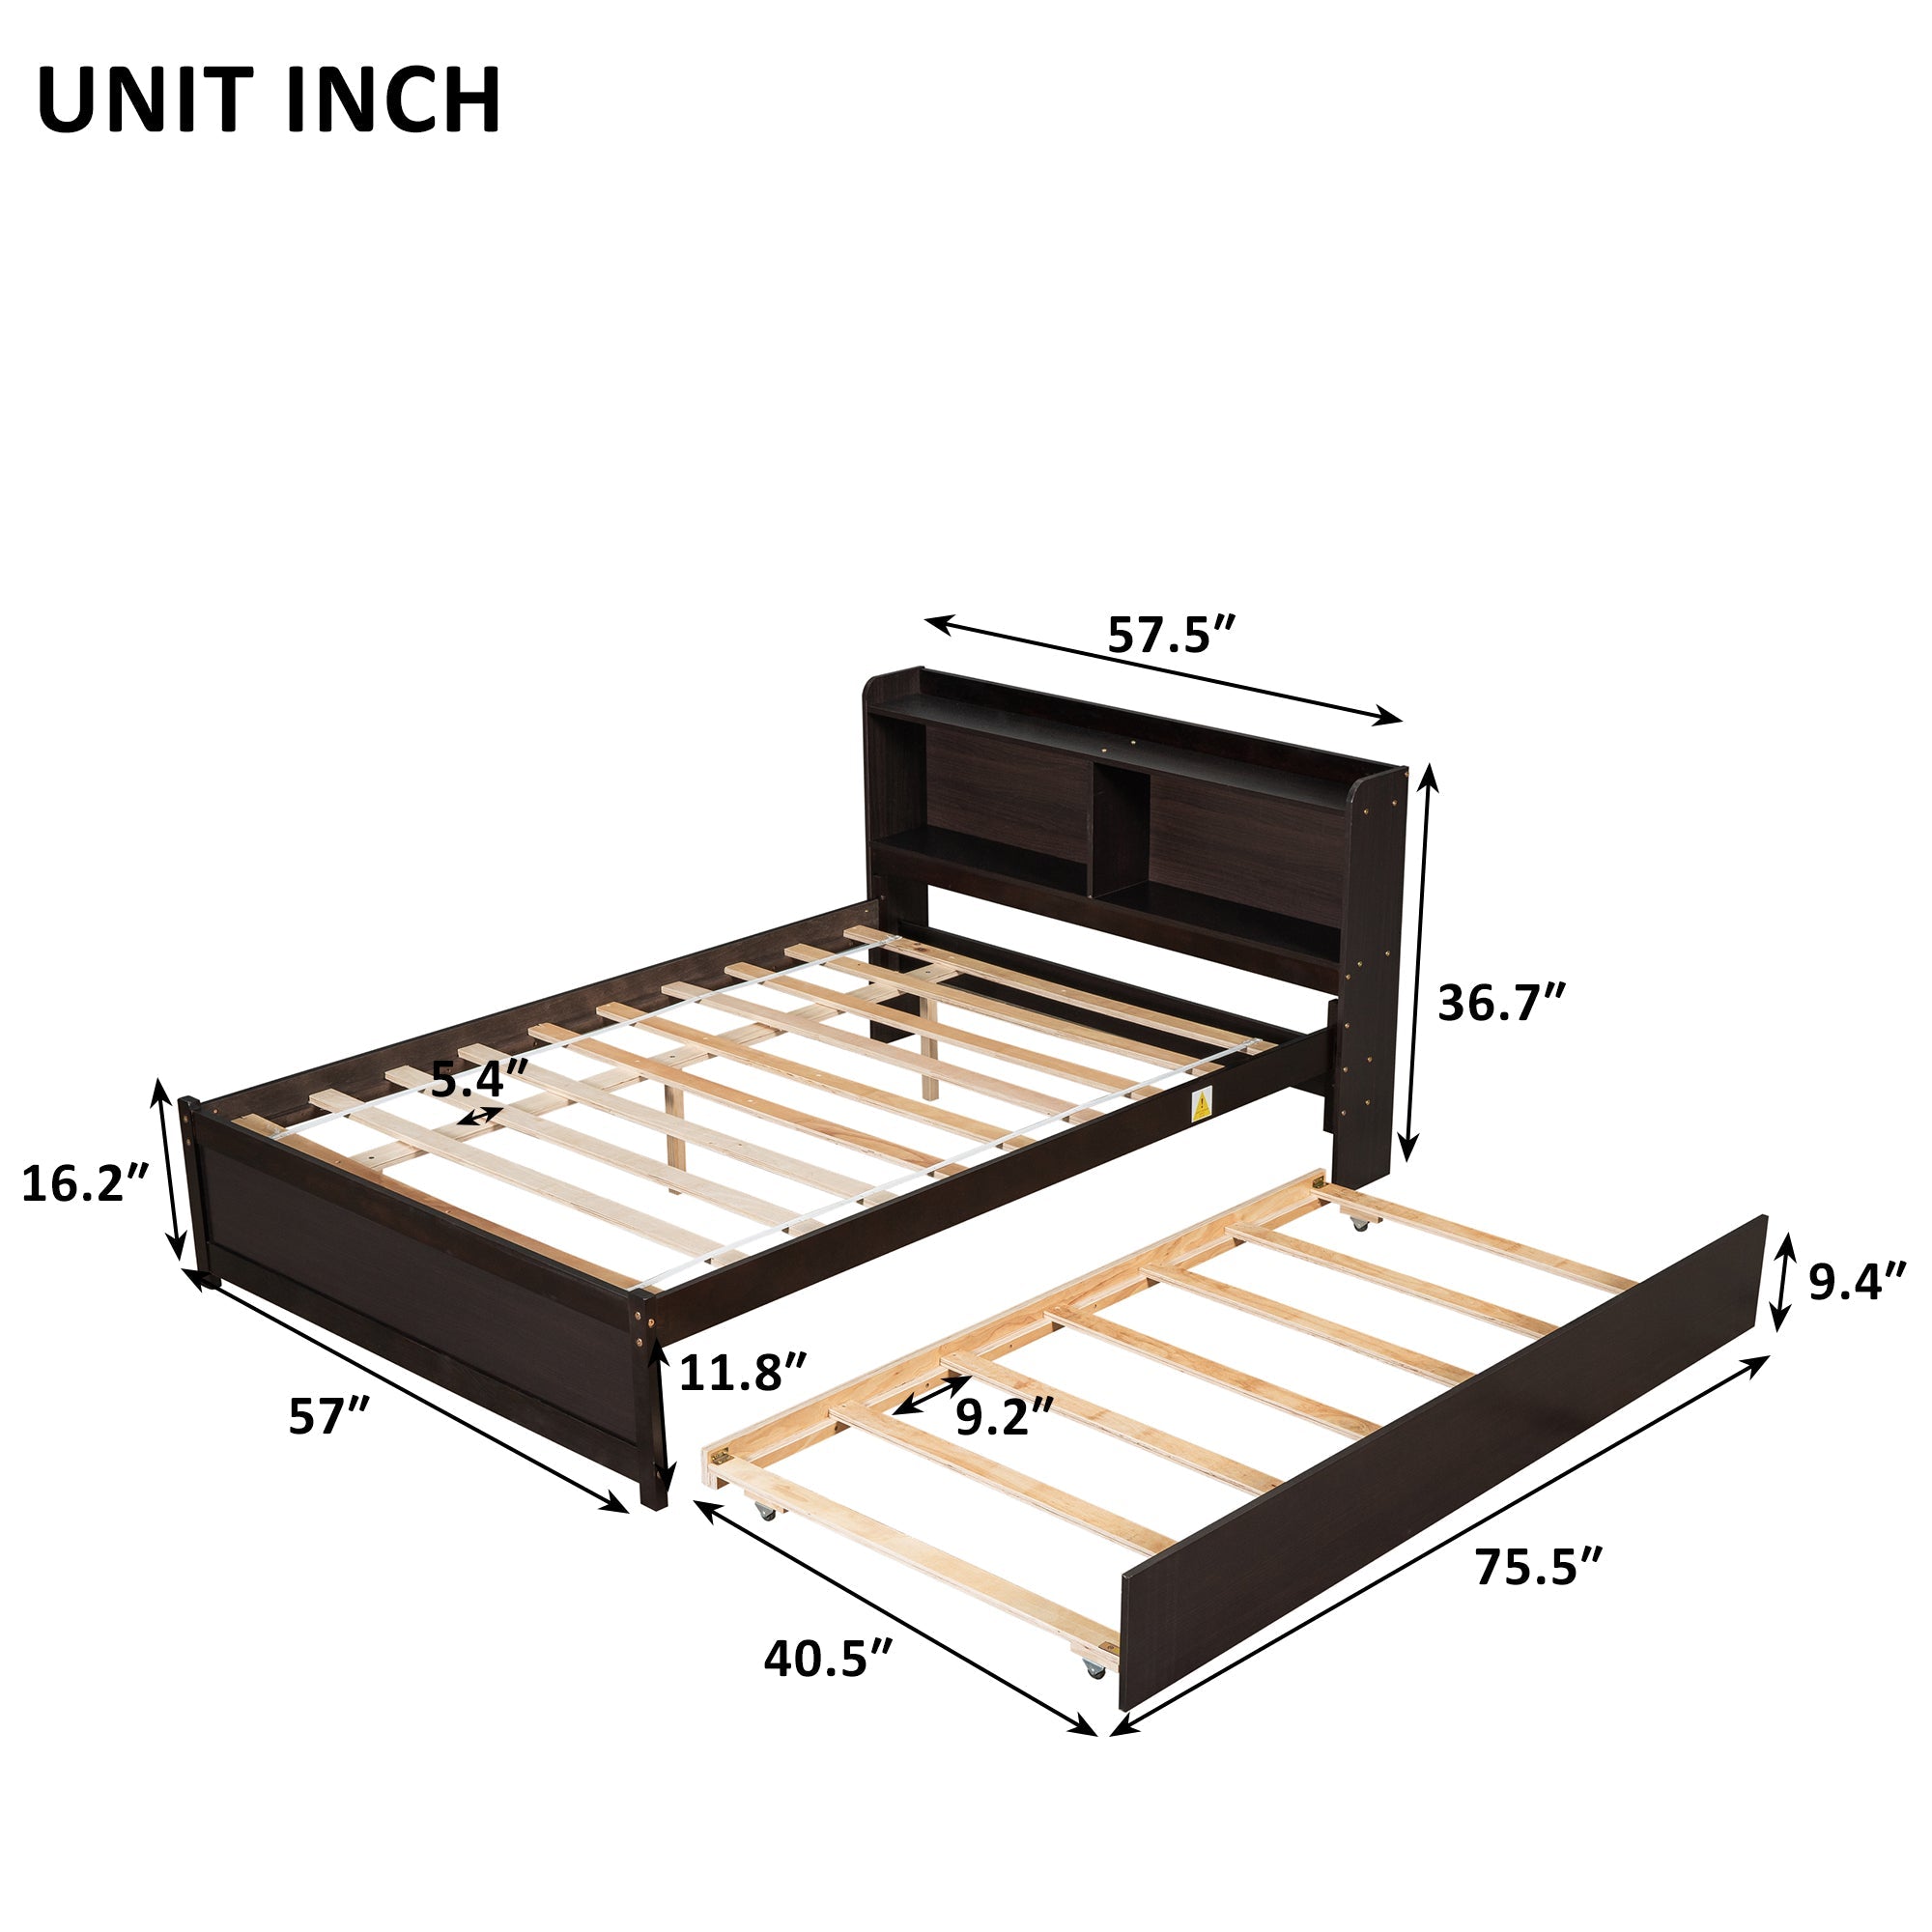 SYNGAR Full Bed Frame with Storage and Trundle for Teens Adults, Espresso Trundle Full Bed Frame with Bookcase Headboard, Solid wood, Easy to Assemble, No Box Spring Needed